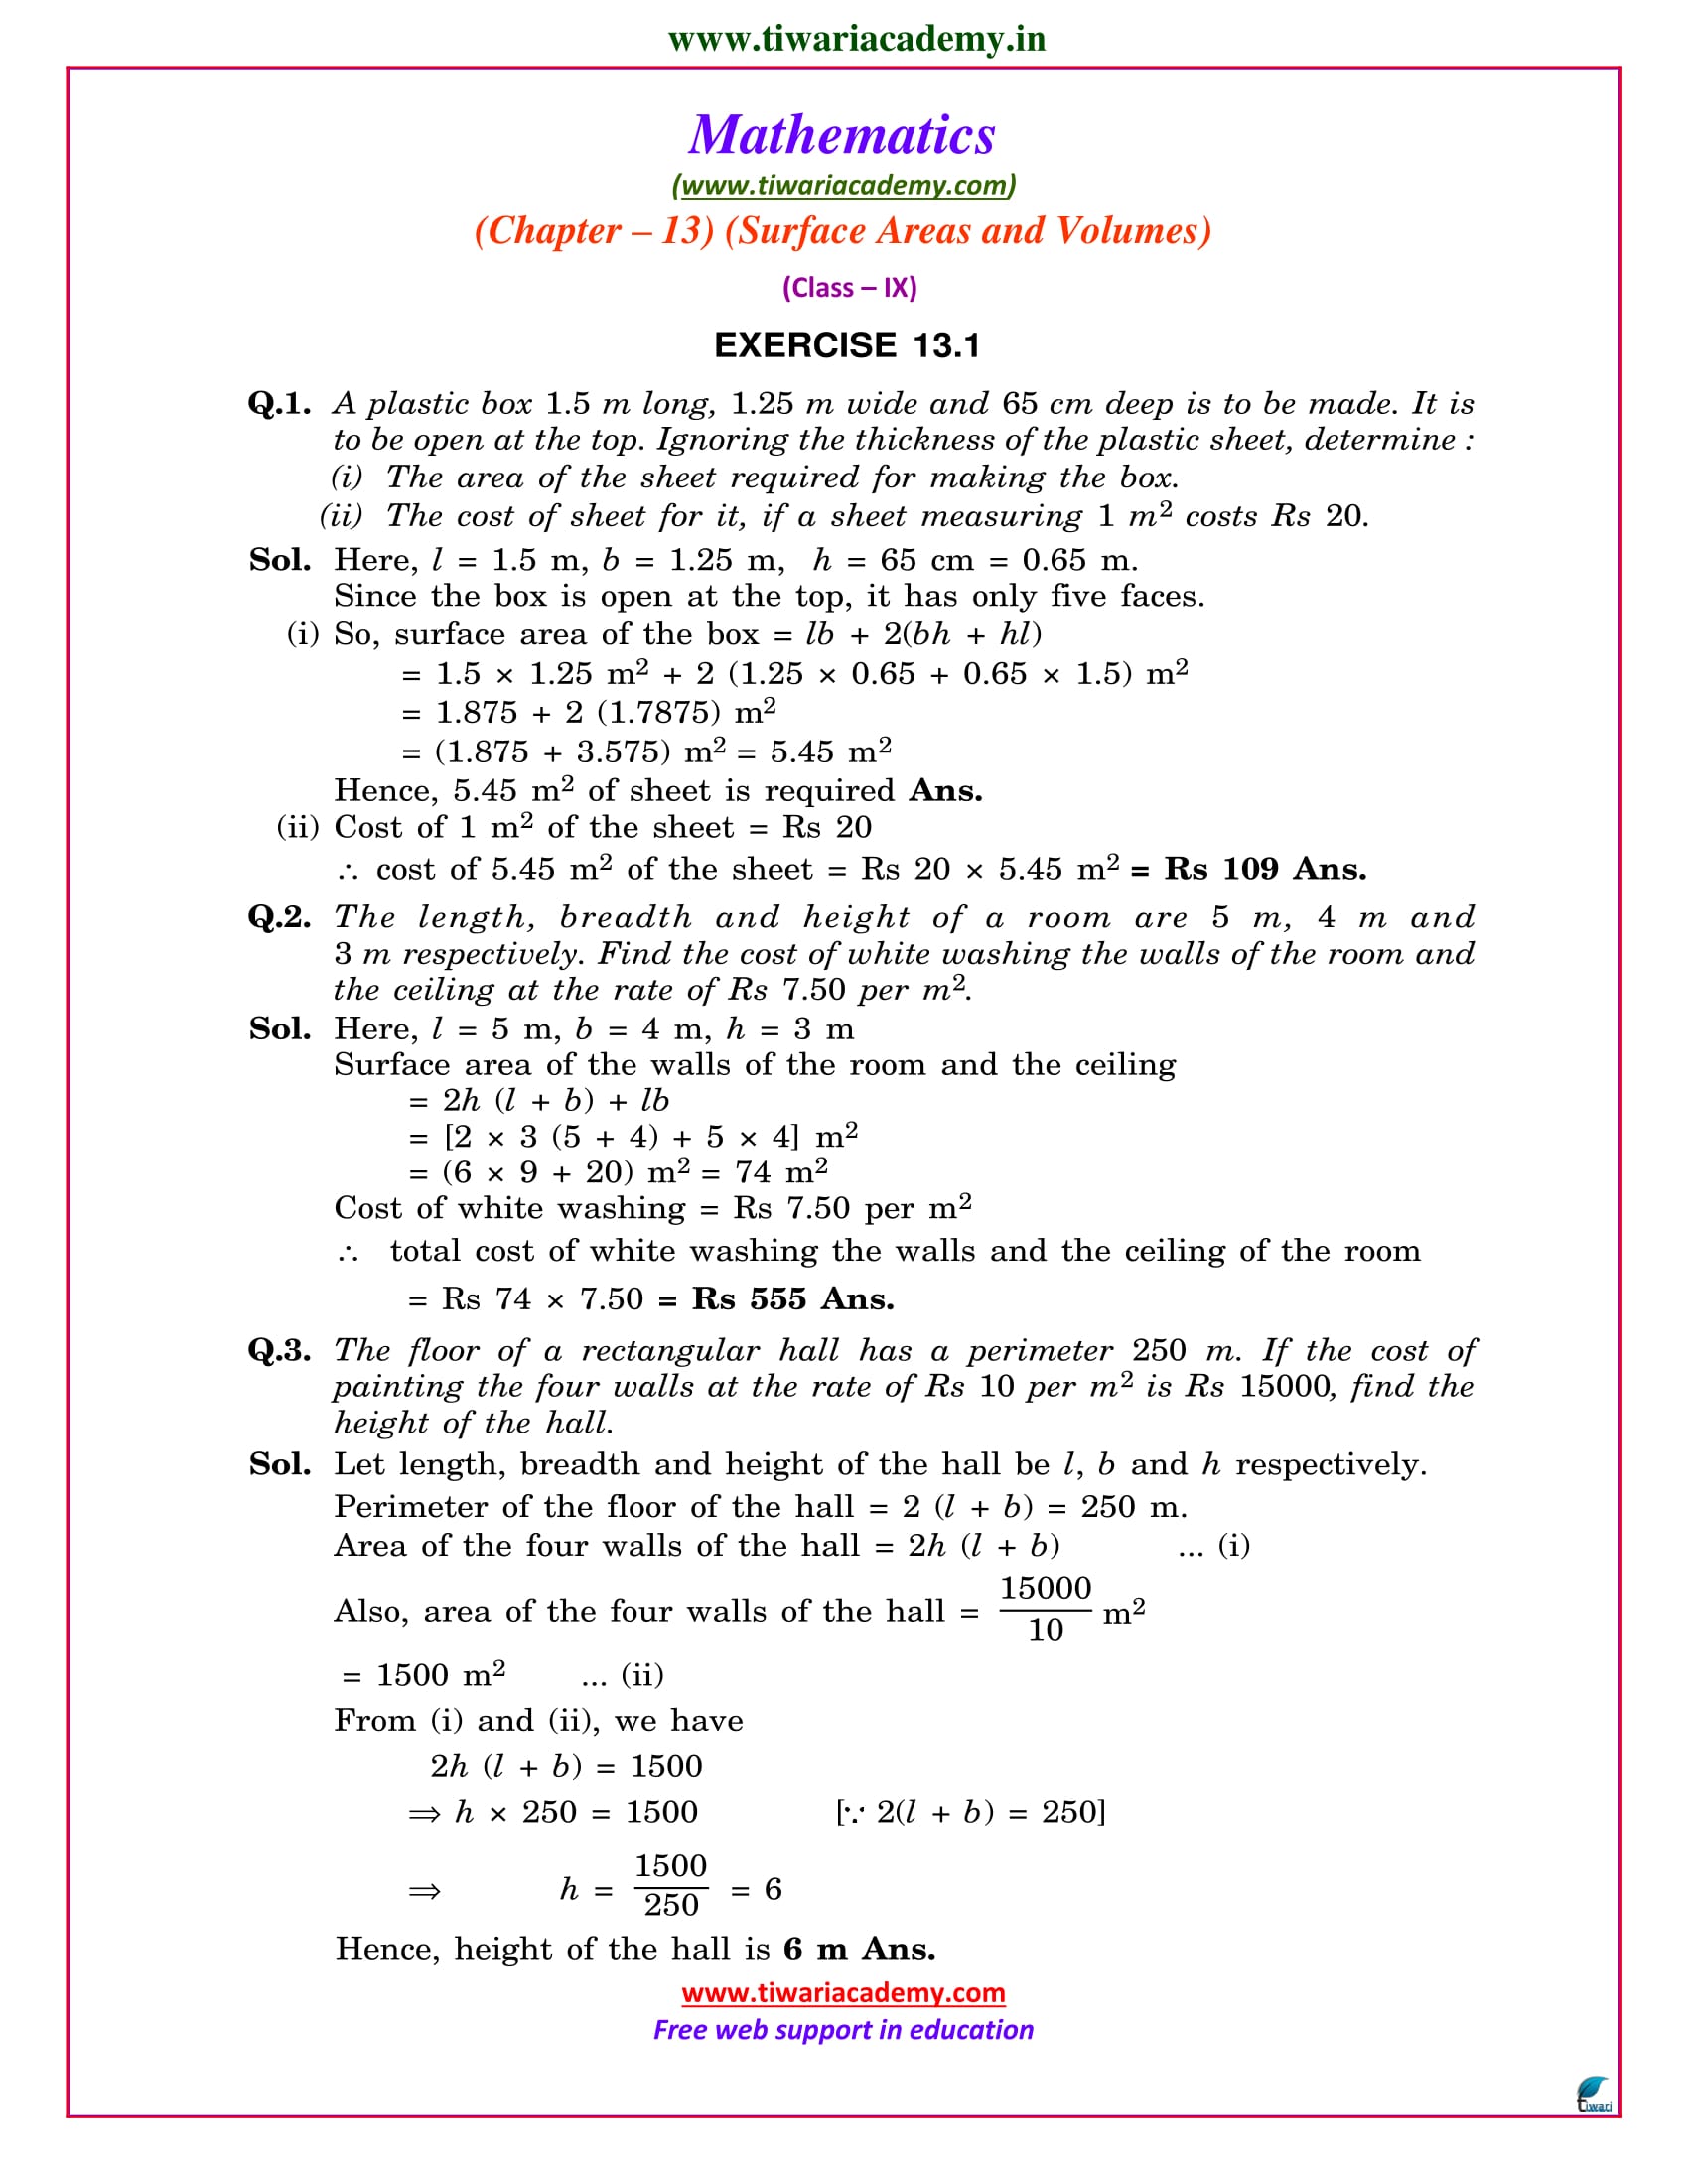 NCERT Solutions for Class 9 Maths Chapter 13 Exercise 13.1